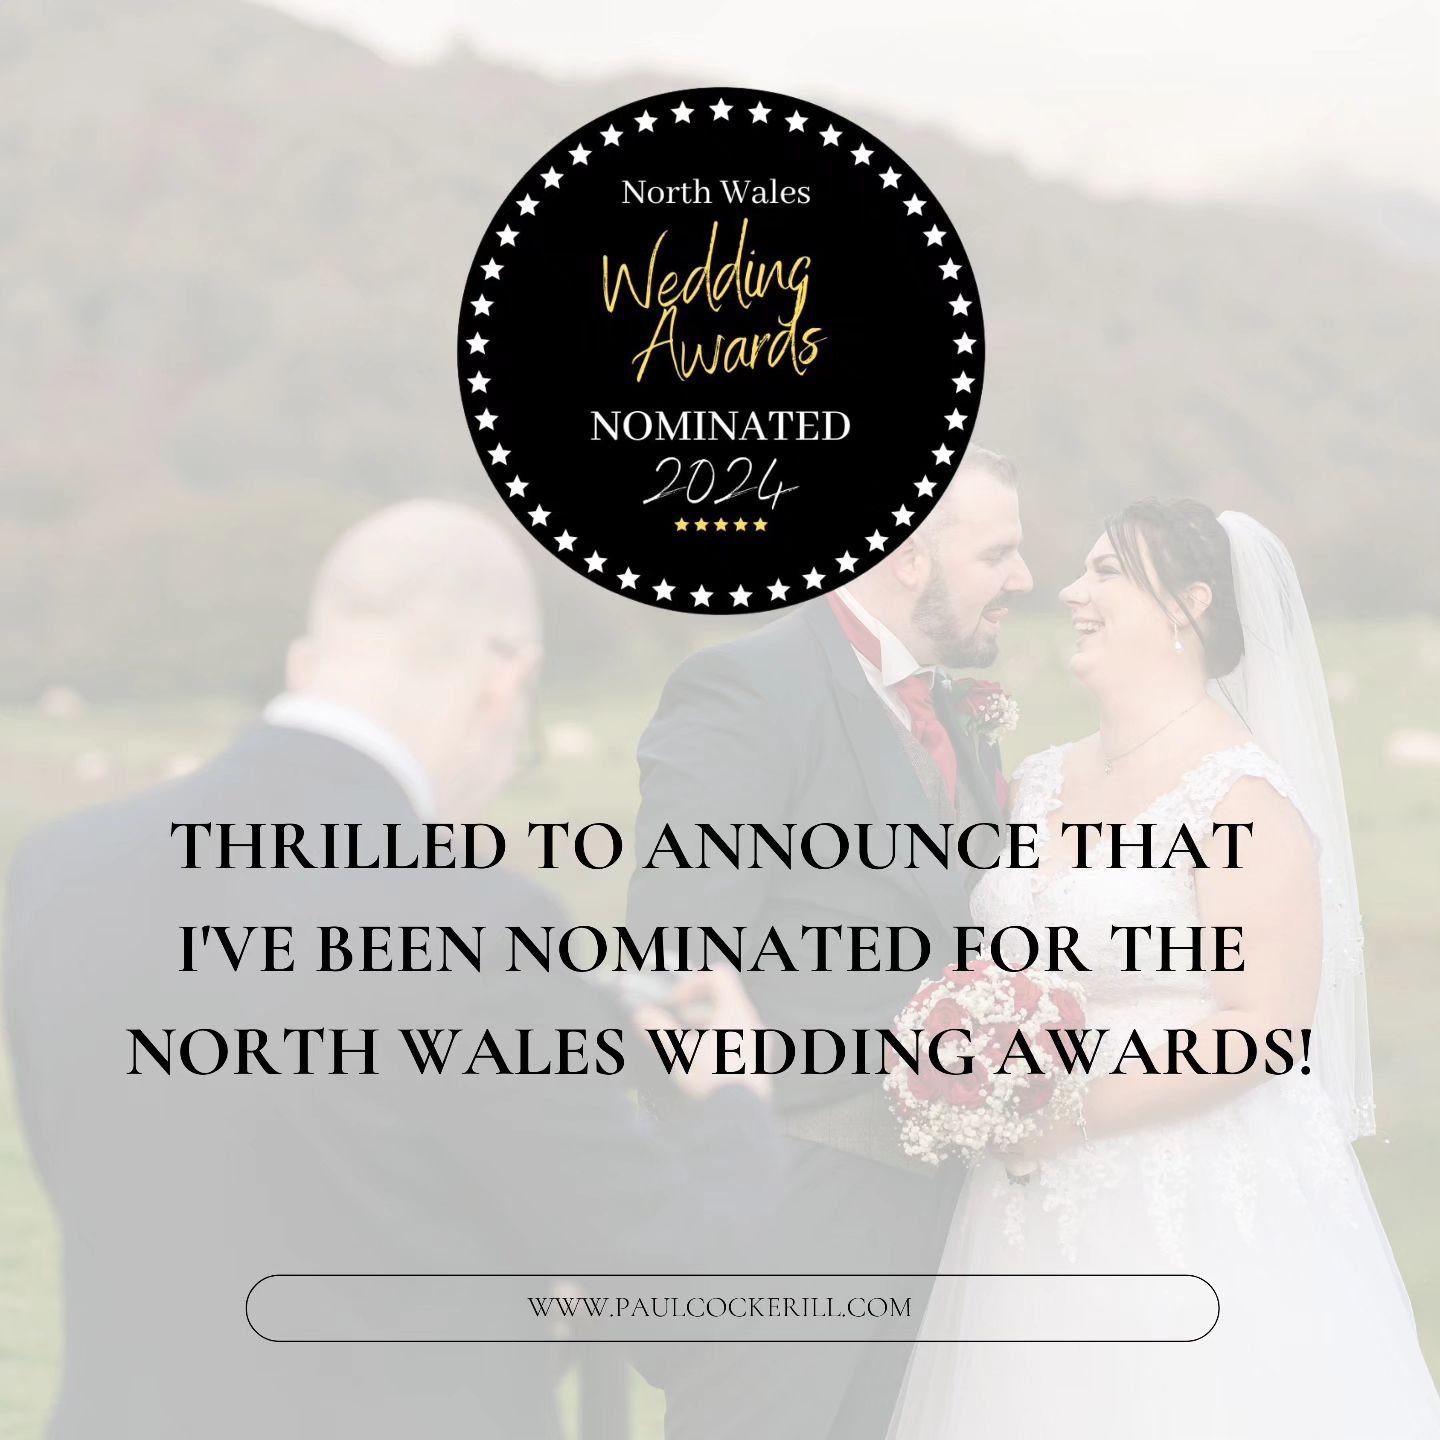 I'm thrilled to share that I've been nominated for the 2024 North Wales Wedding Awards! 

Thank you from the bottom of my heart to everyone who supported me on this journey. 

If you'd like to show your support, you can cast your vote by clicking the